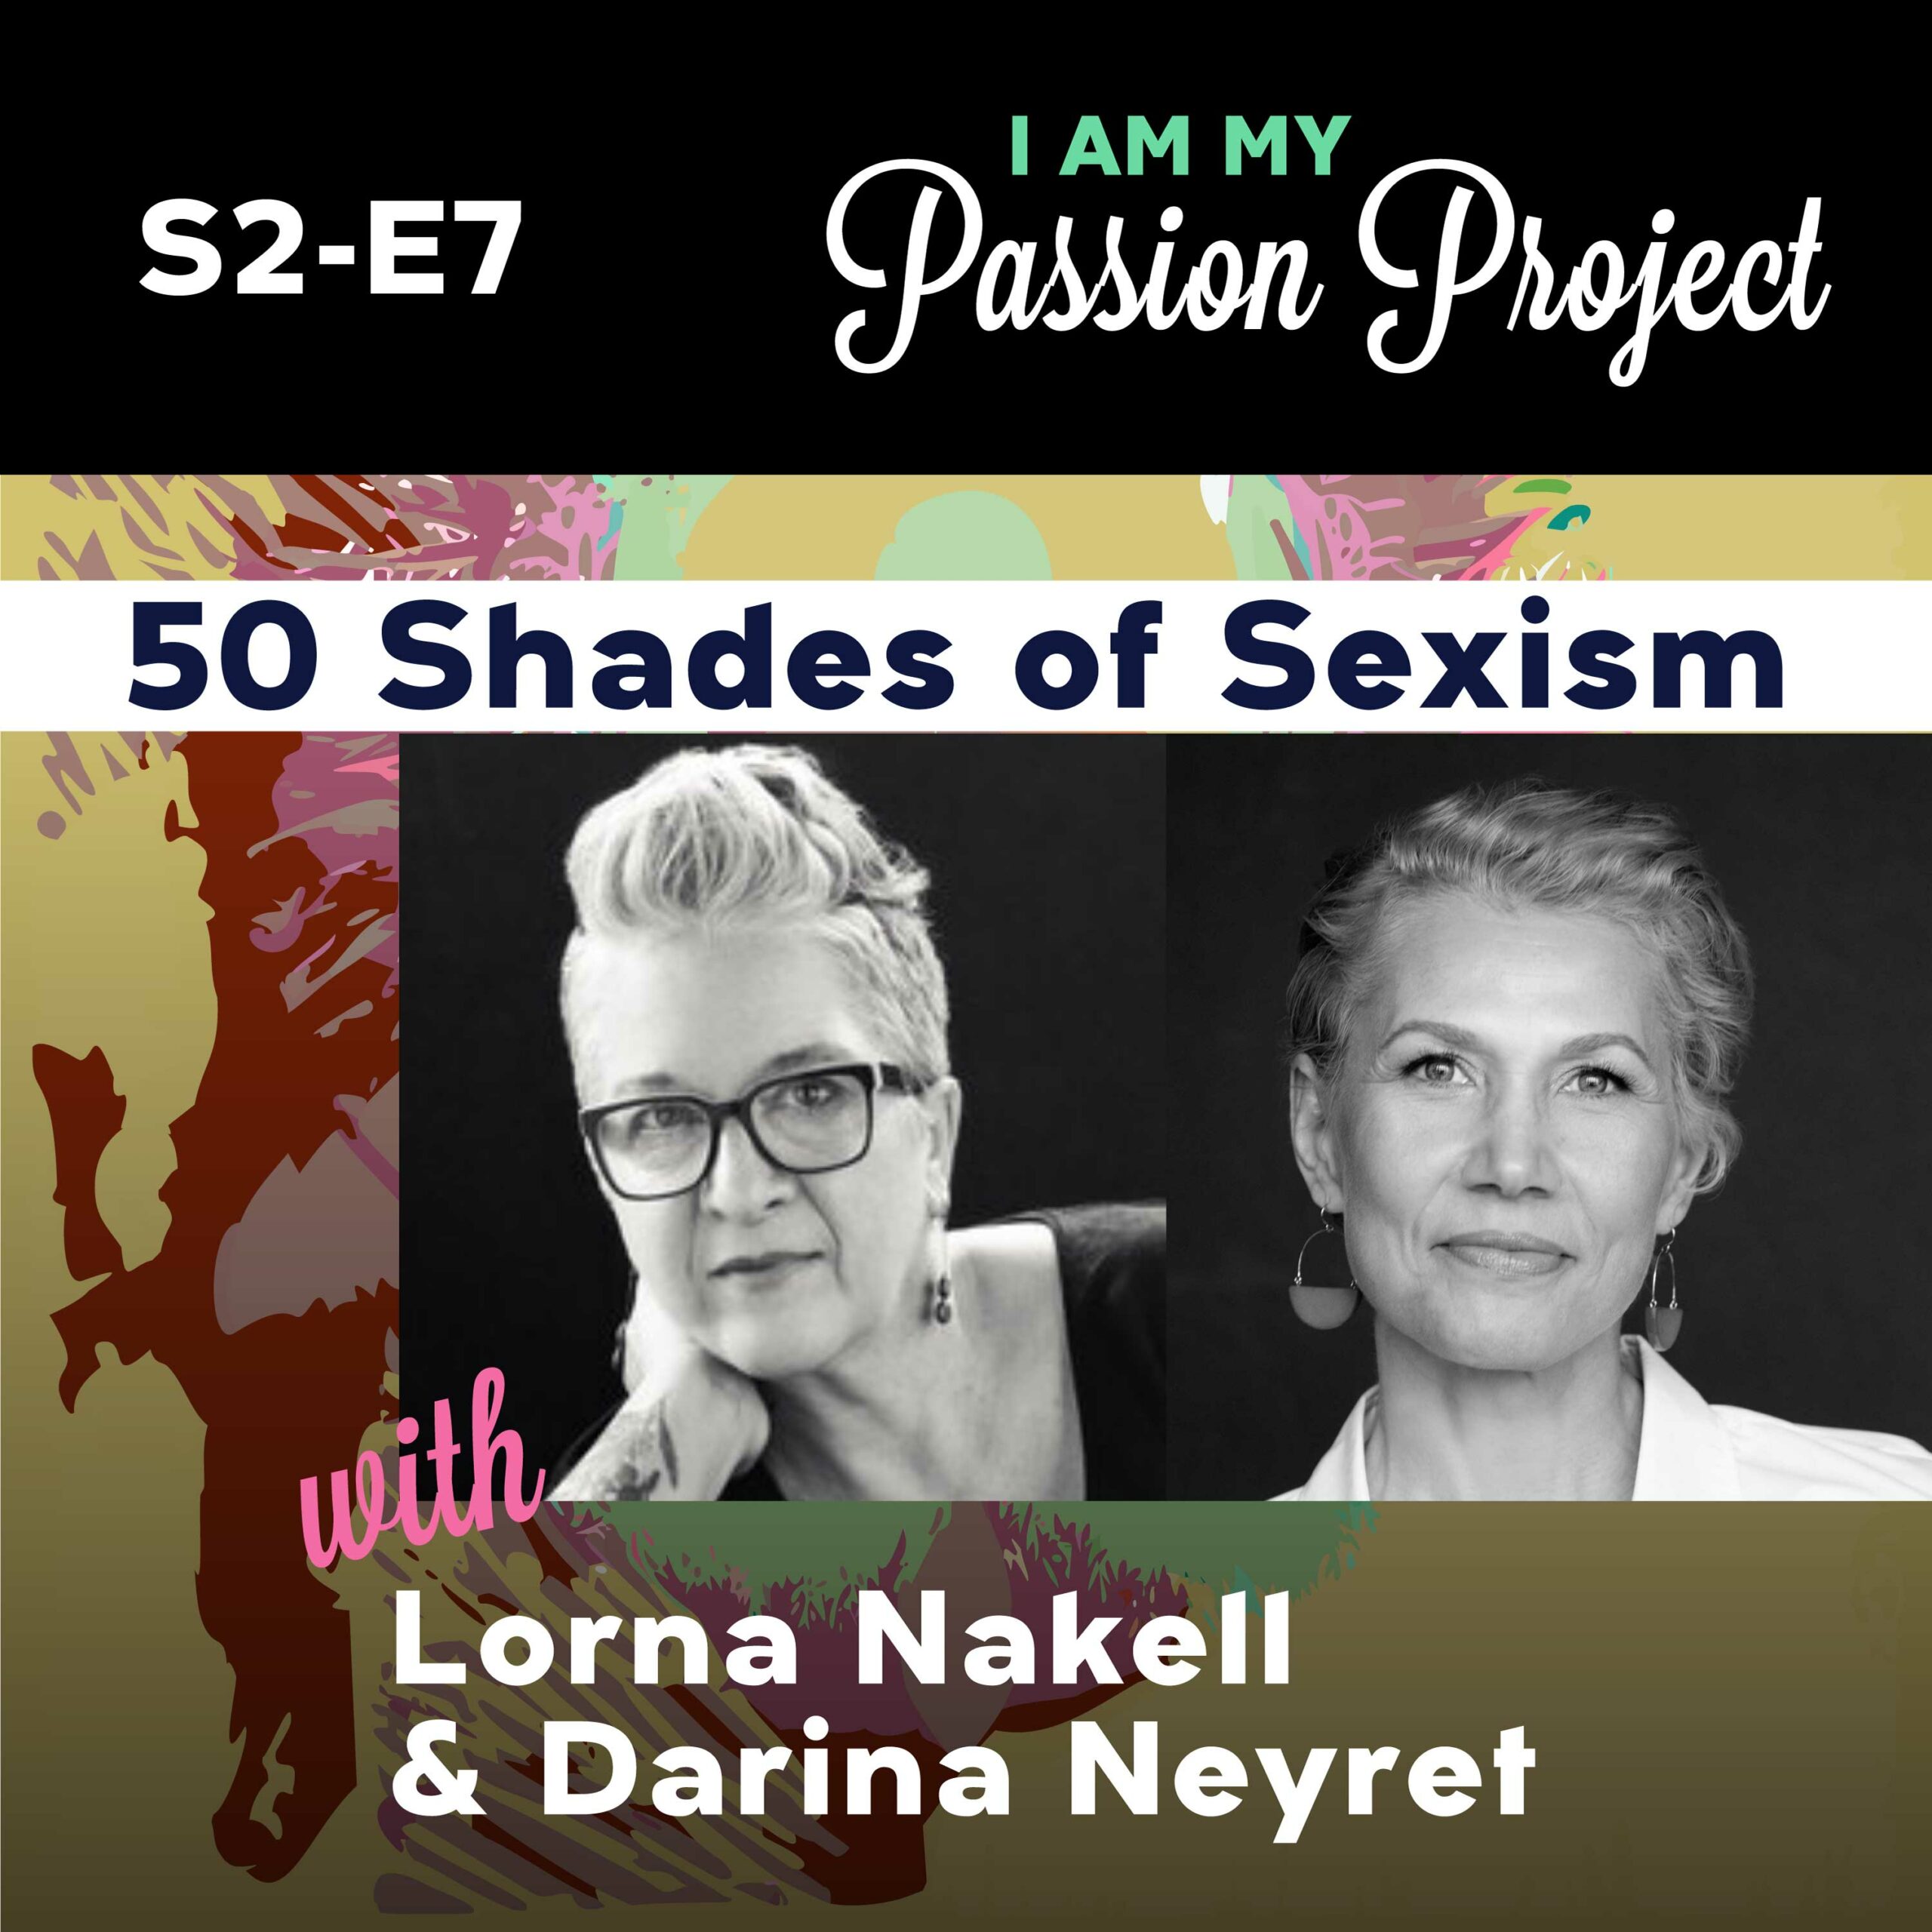 50 Shades of Sexism Reviews the Movie: Barbie with Darina Neyret and Lorna Nakell